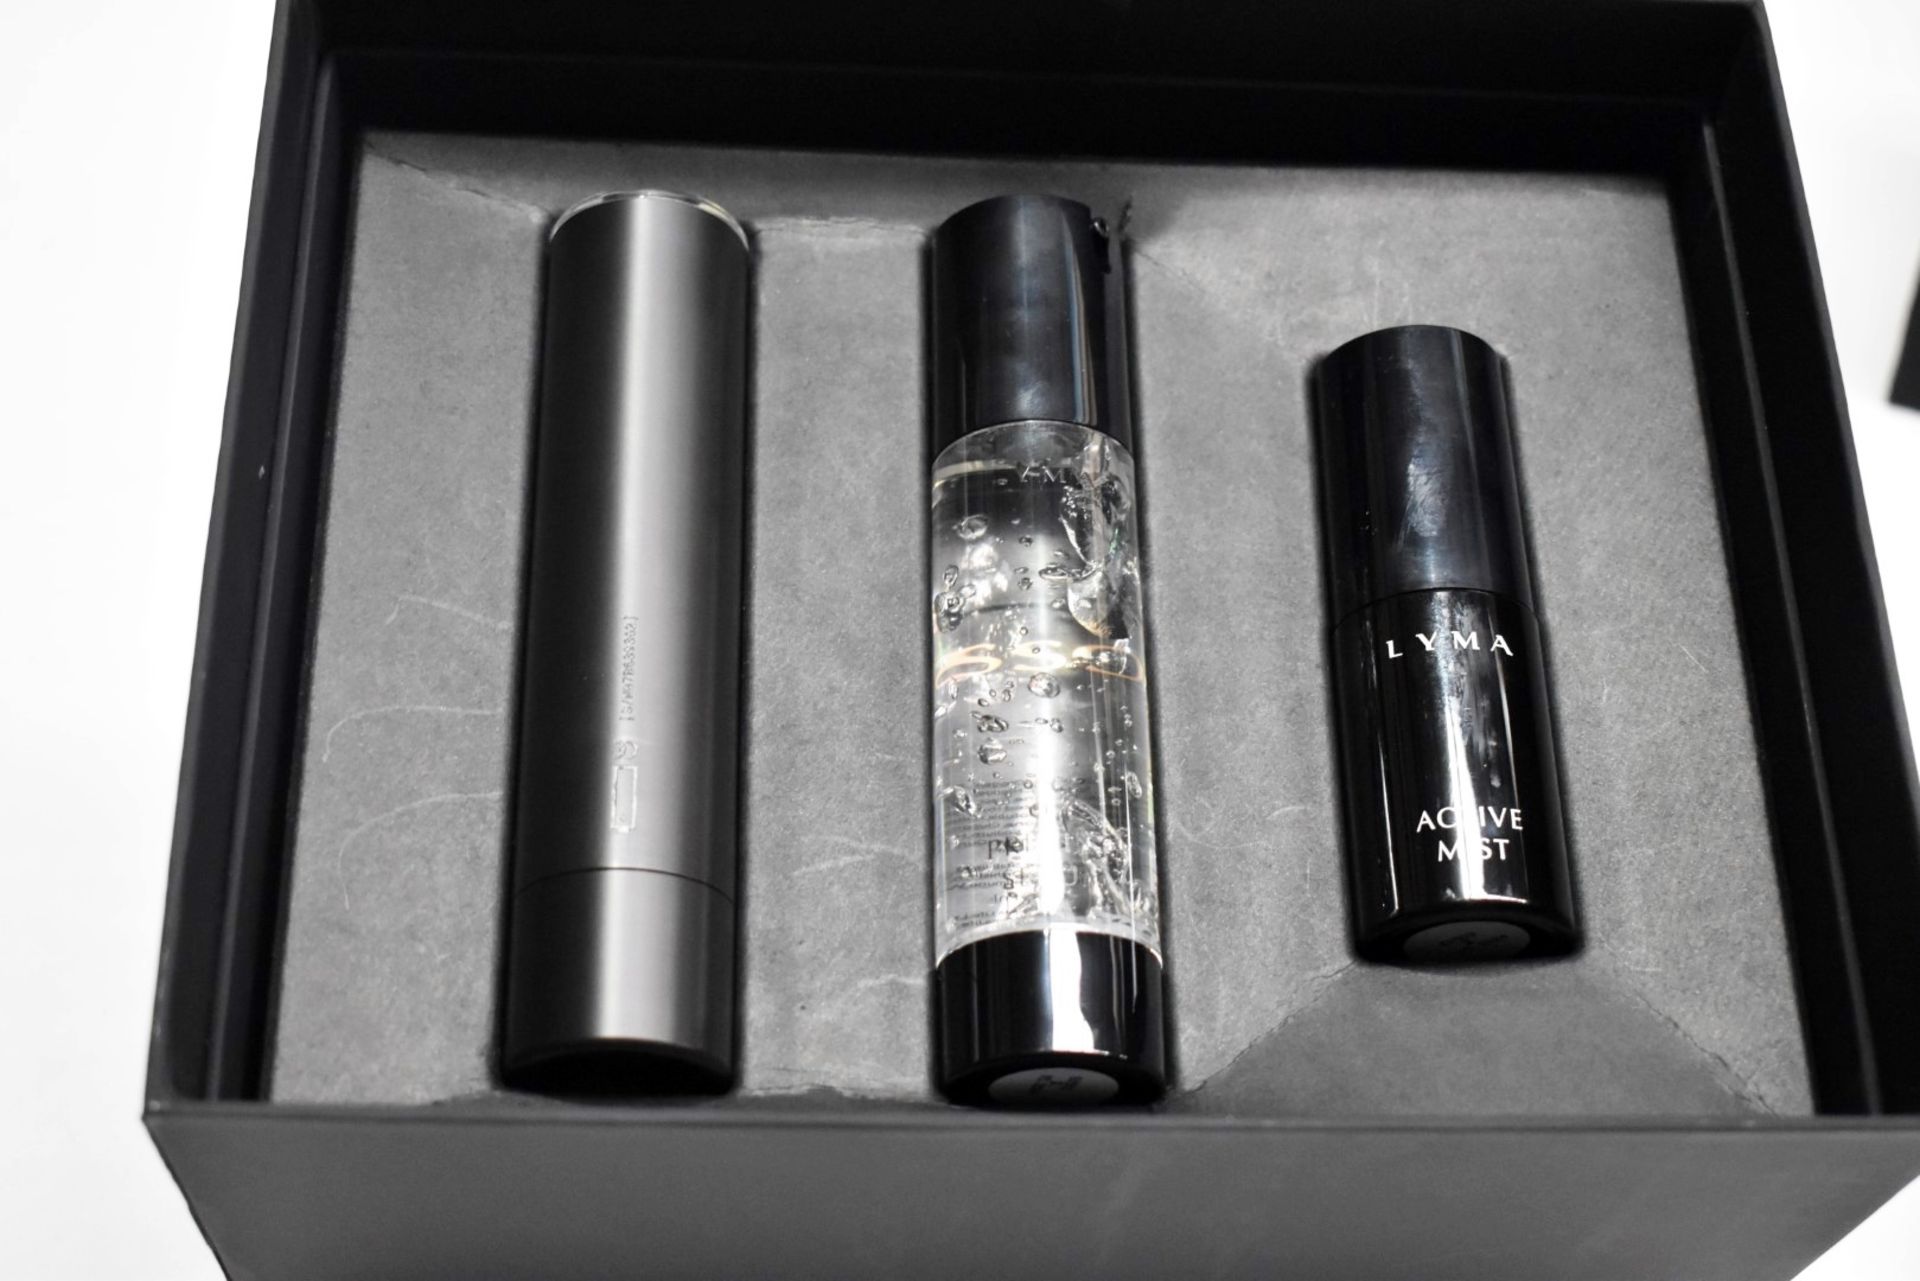 1 x LYMA Home Laser Skincare Treatment Starter Kit With Active Mist and Priming Serum - RRP £1,999 - Image 6 of 22